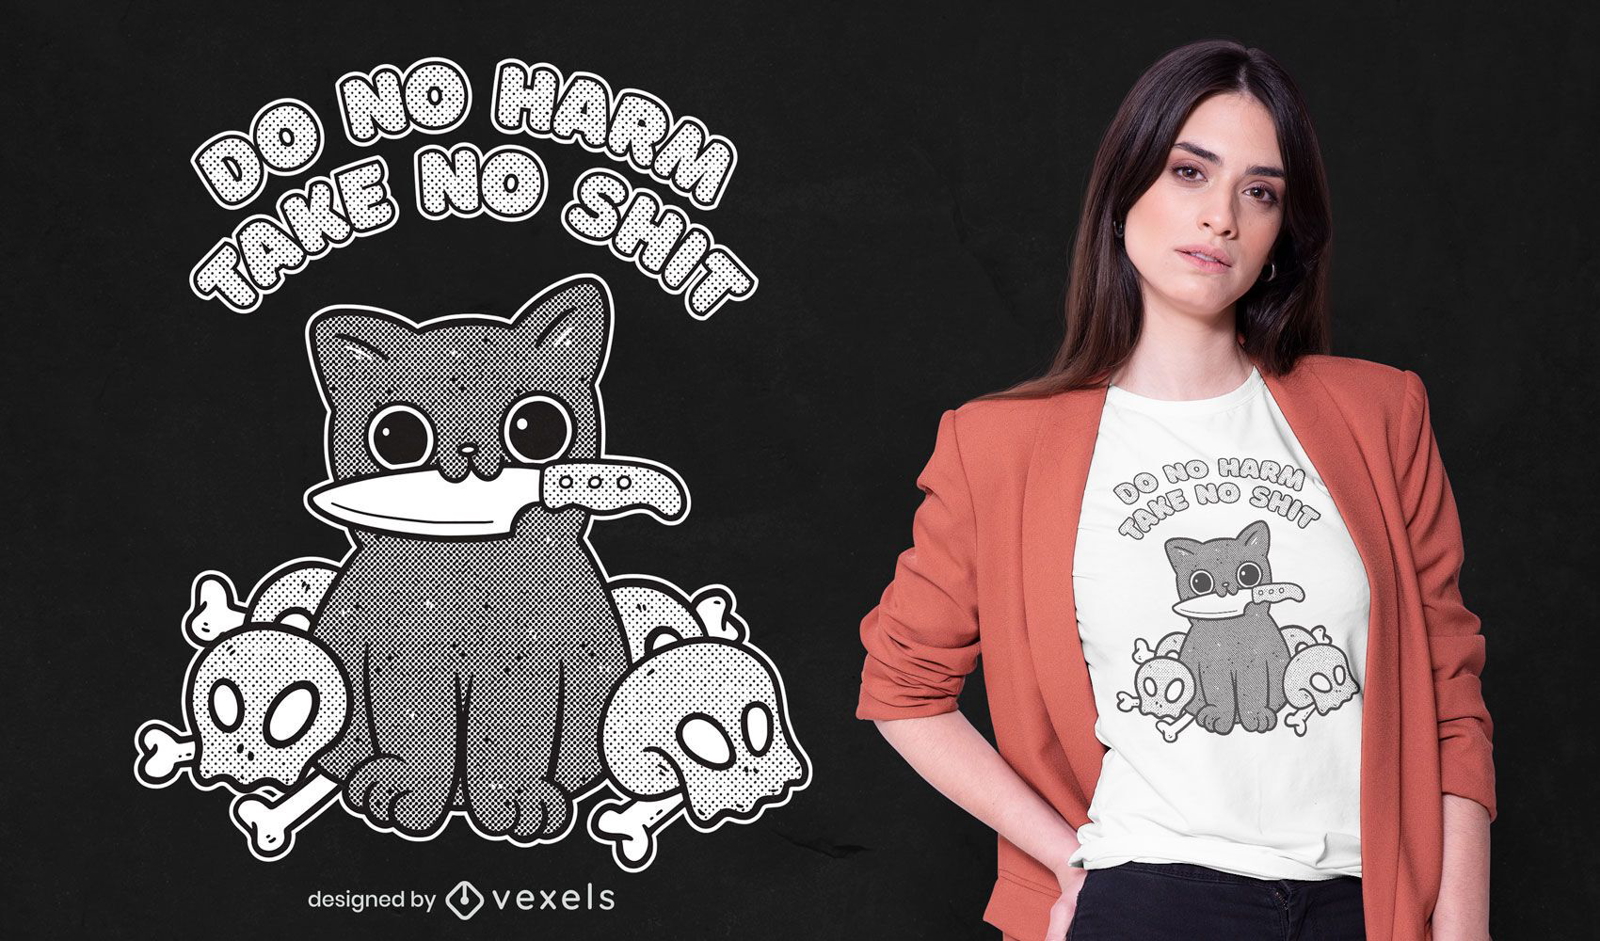 Kitty knife quote t-shirt design